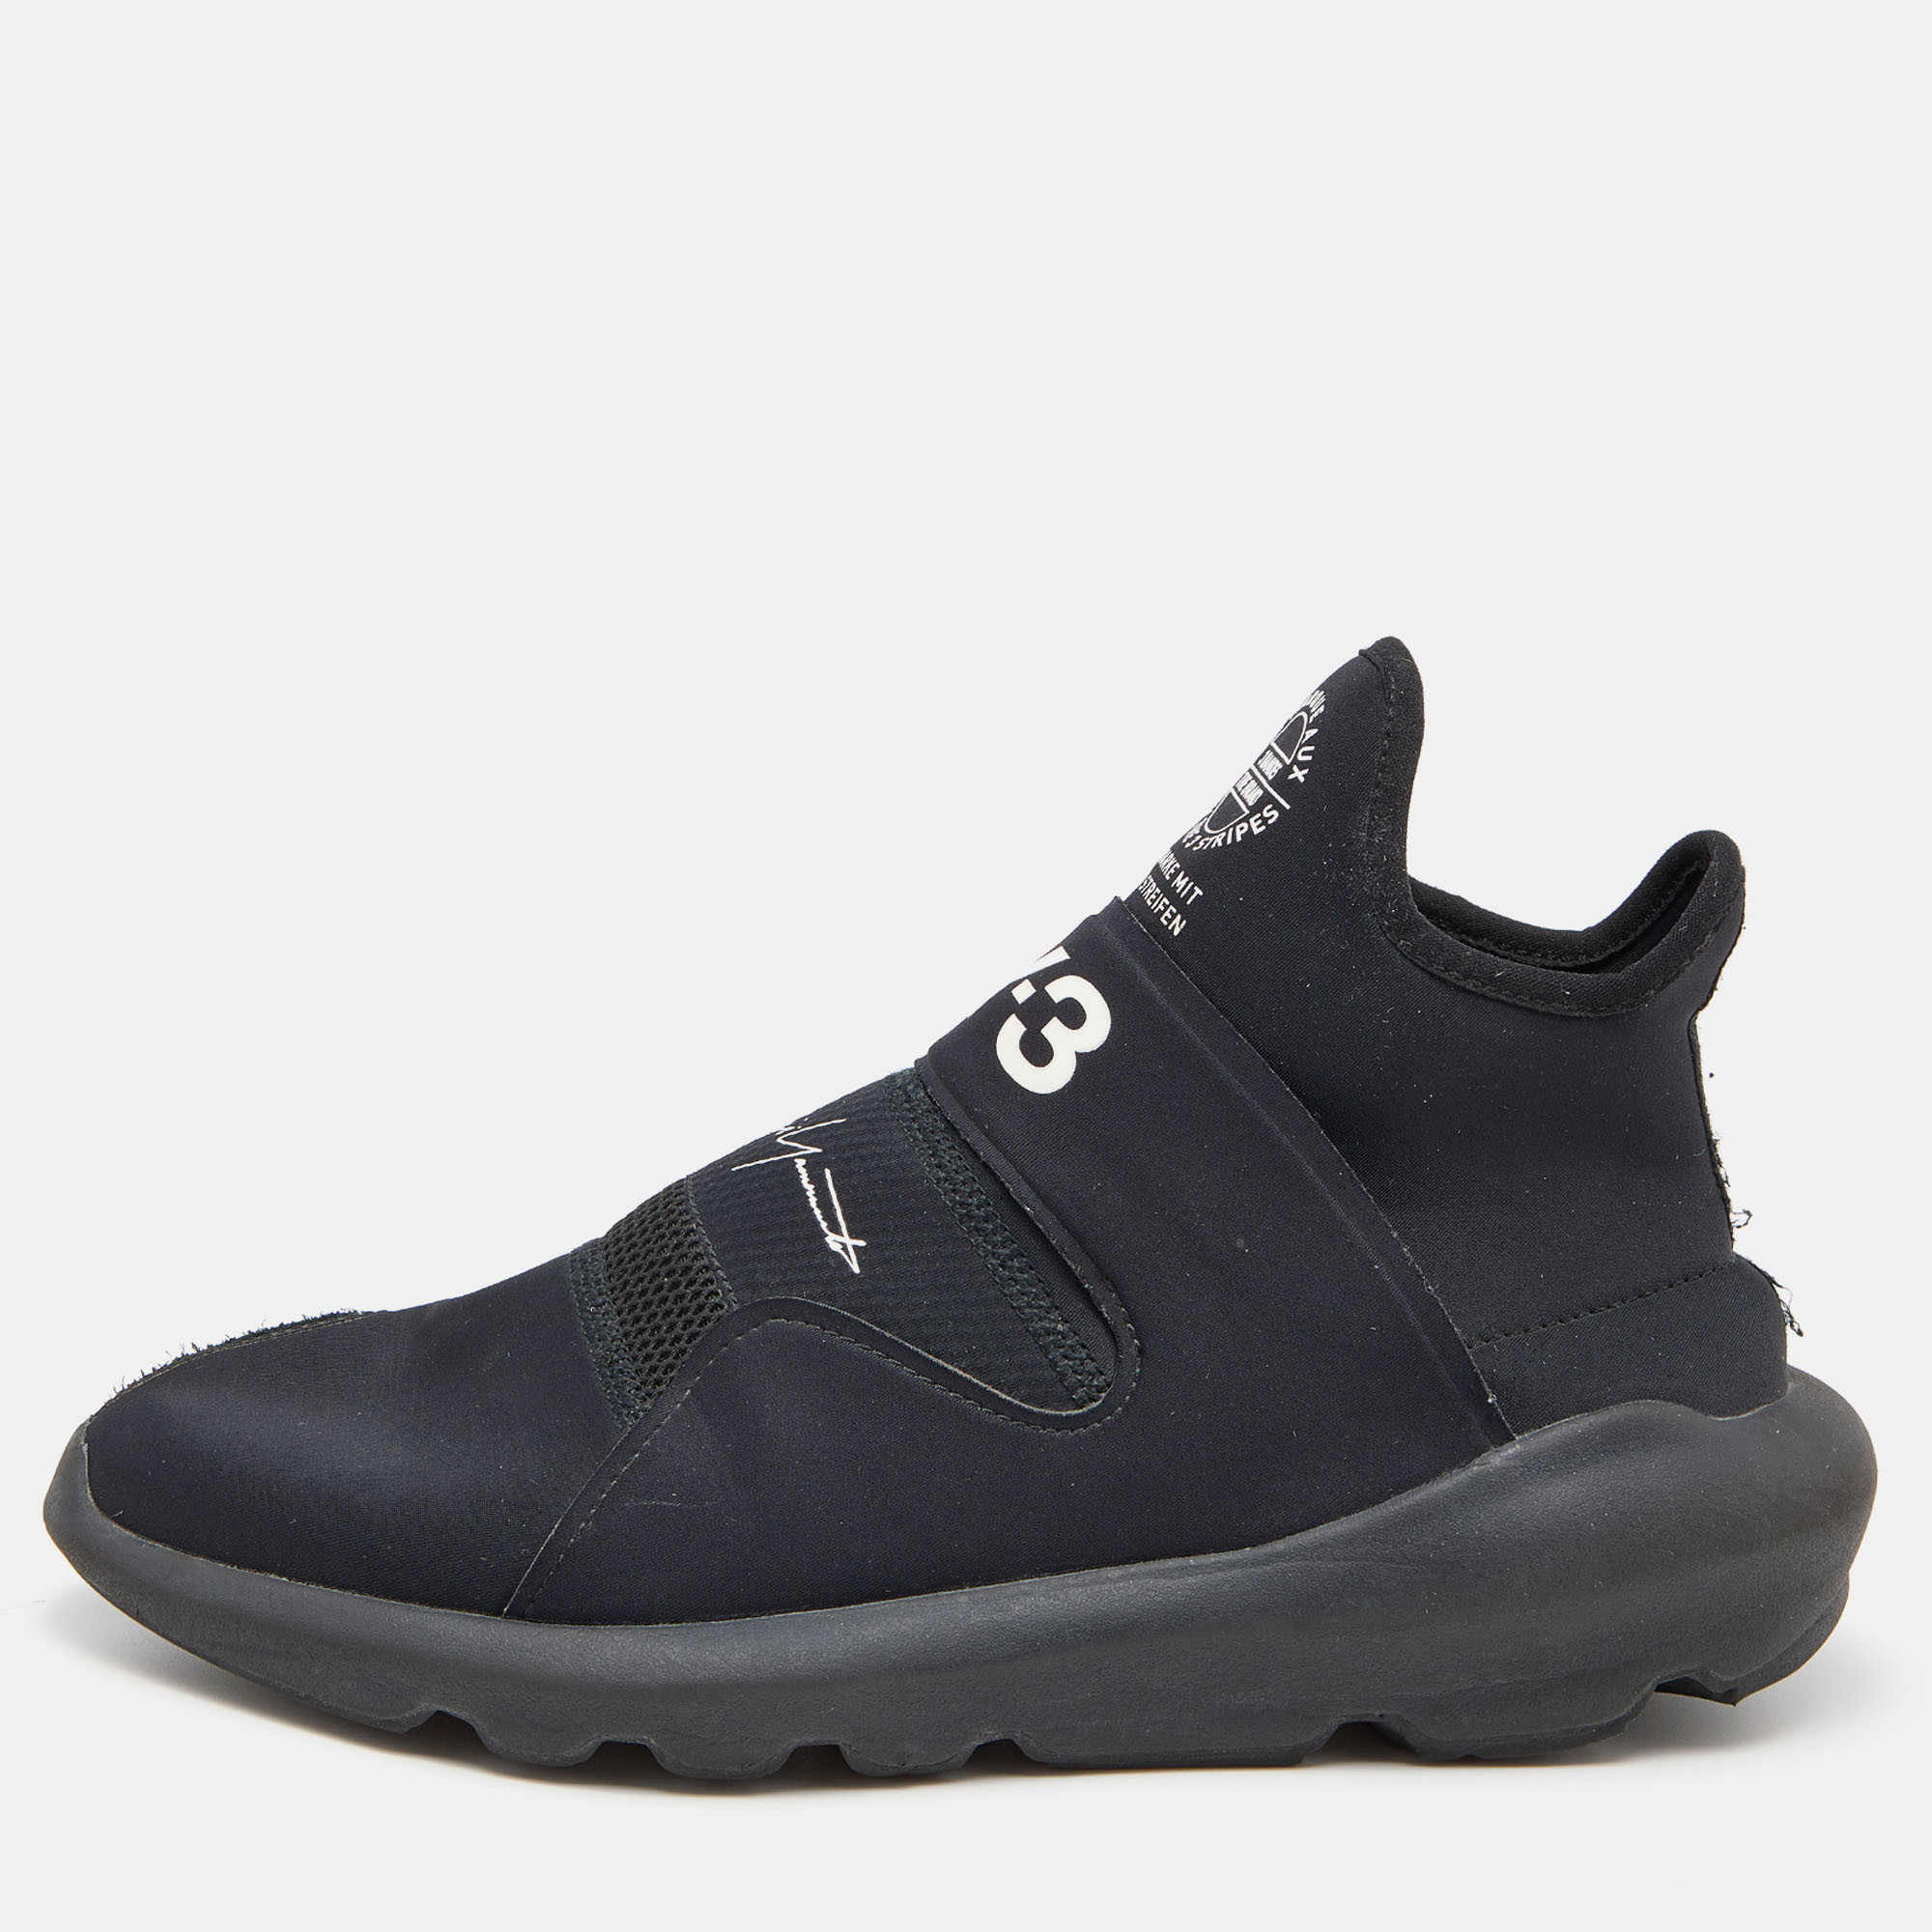 These Y3 x adidas sneakers represent the idea of comfortable fashion. They are crafted from high quality materials and designed with nothing but style. A perfect fit for all casual occasions these sneakers will spruce up any look effortlessly.